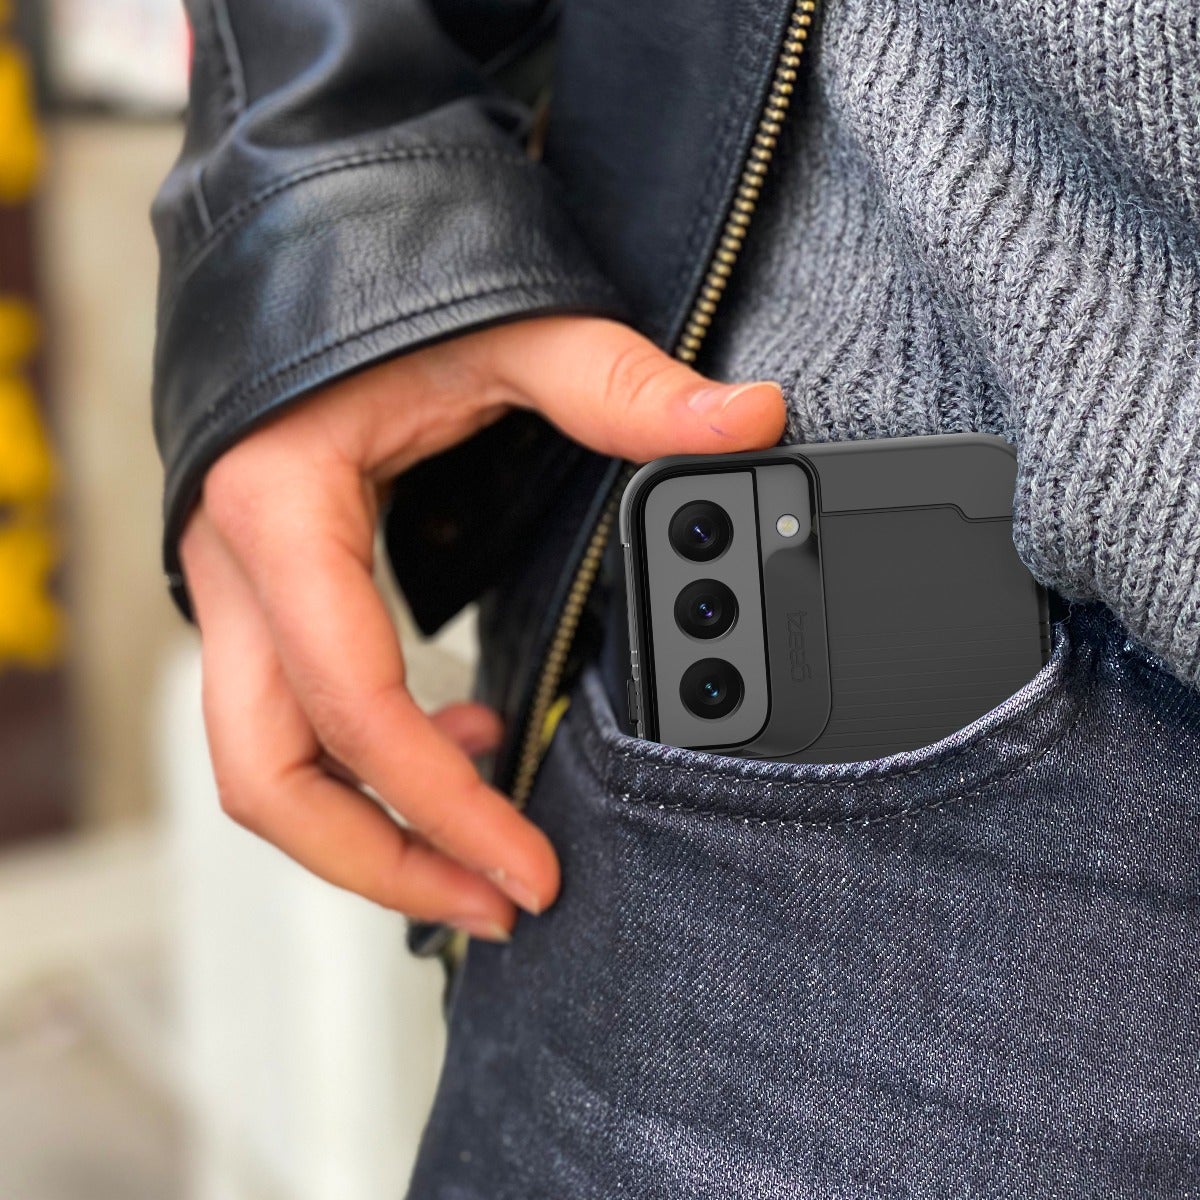 Slim, Lightweight Case
||The slim, lightweight design fits easily in your pocket and comfortably in your hand.
